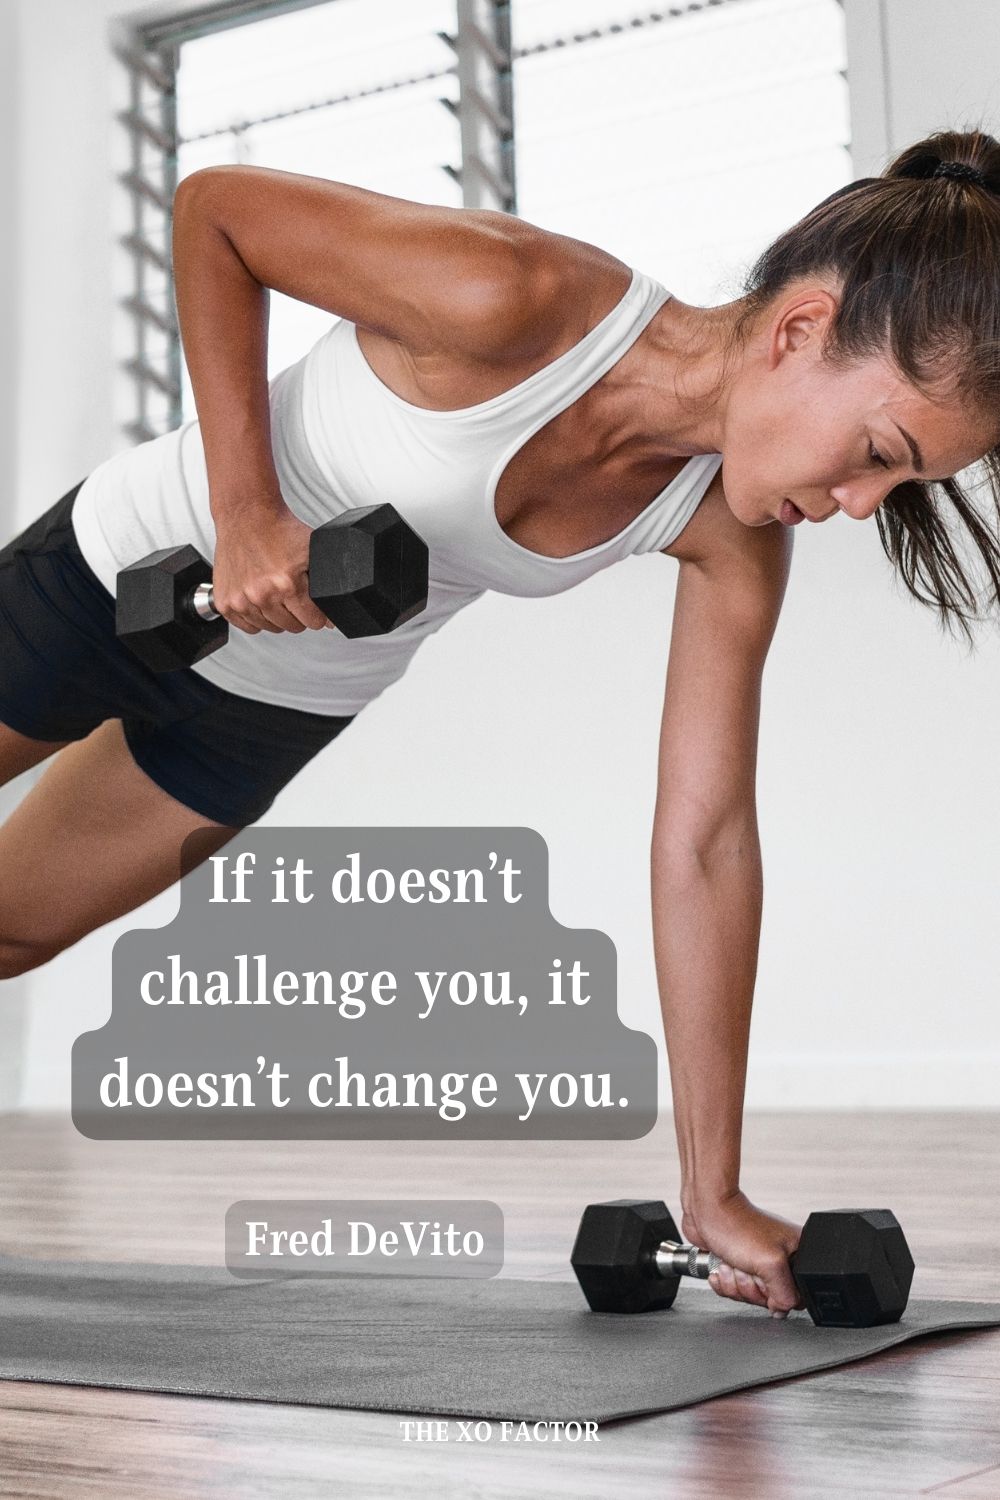 If it doesn’t challenge you, it doesn’t change you. Fred DeVito